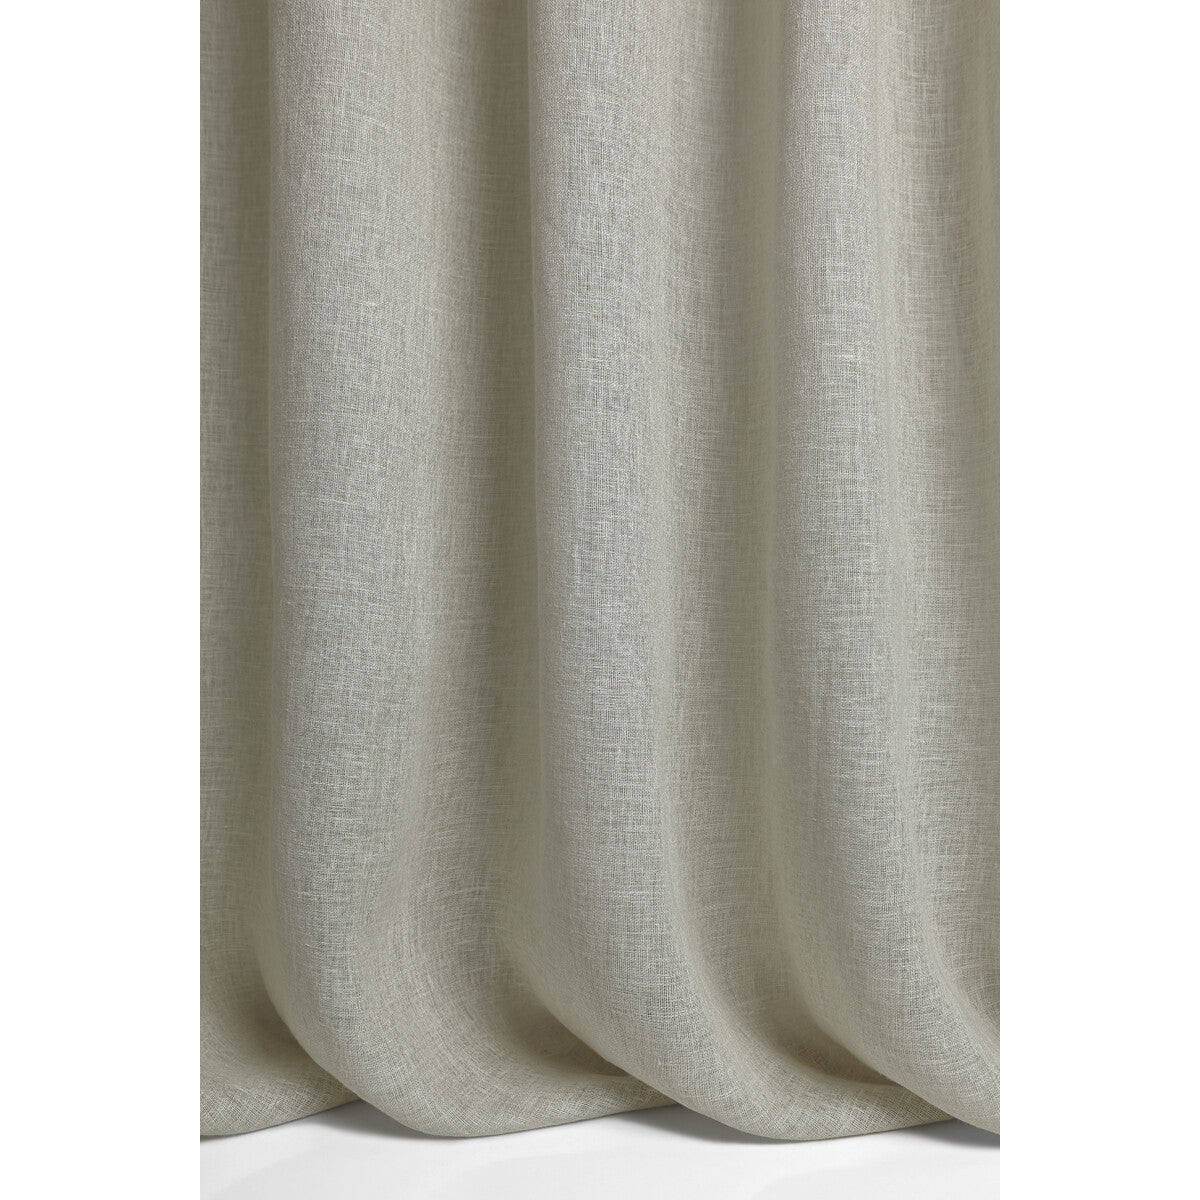 Moss fabric in 6 color - pattern LZ-30389.06.0 - by Kravet Design in the Lizzo collection